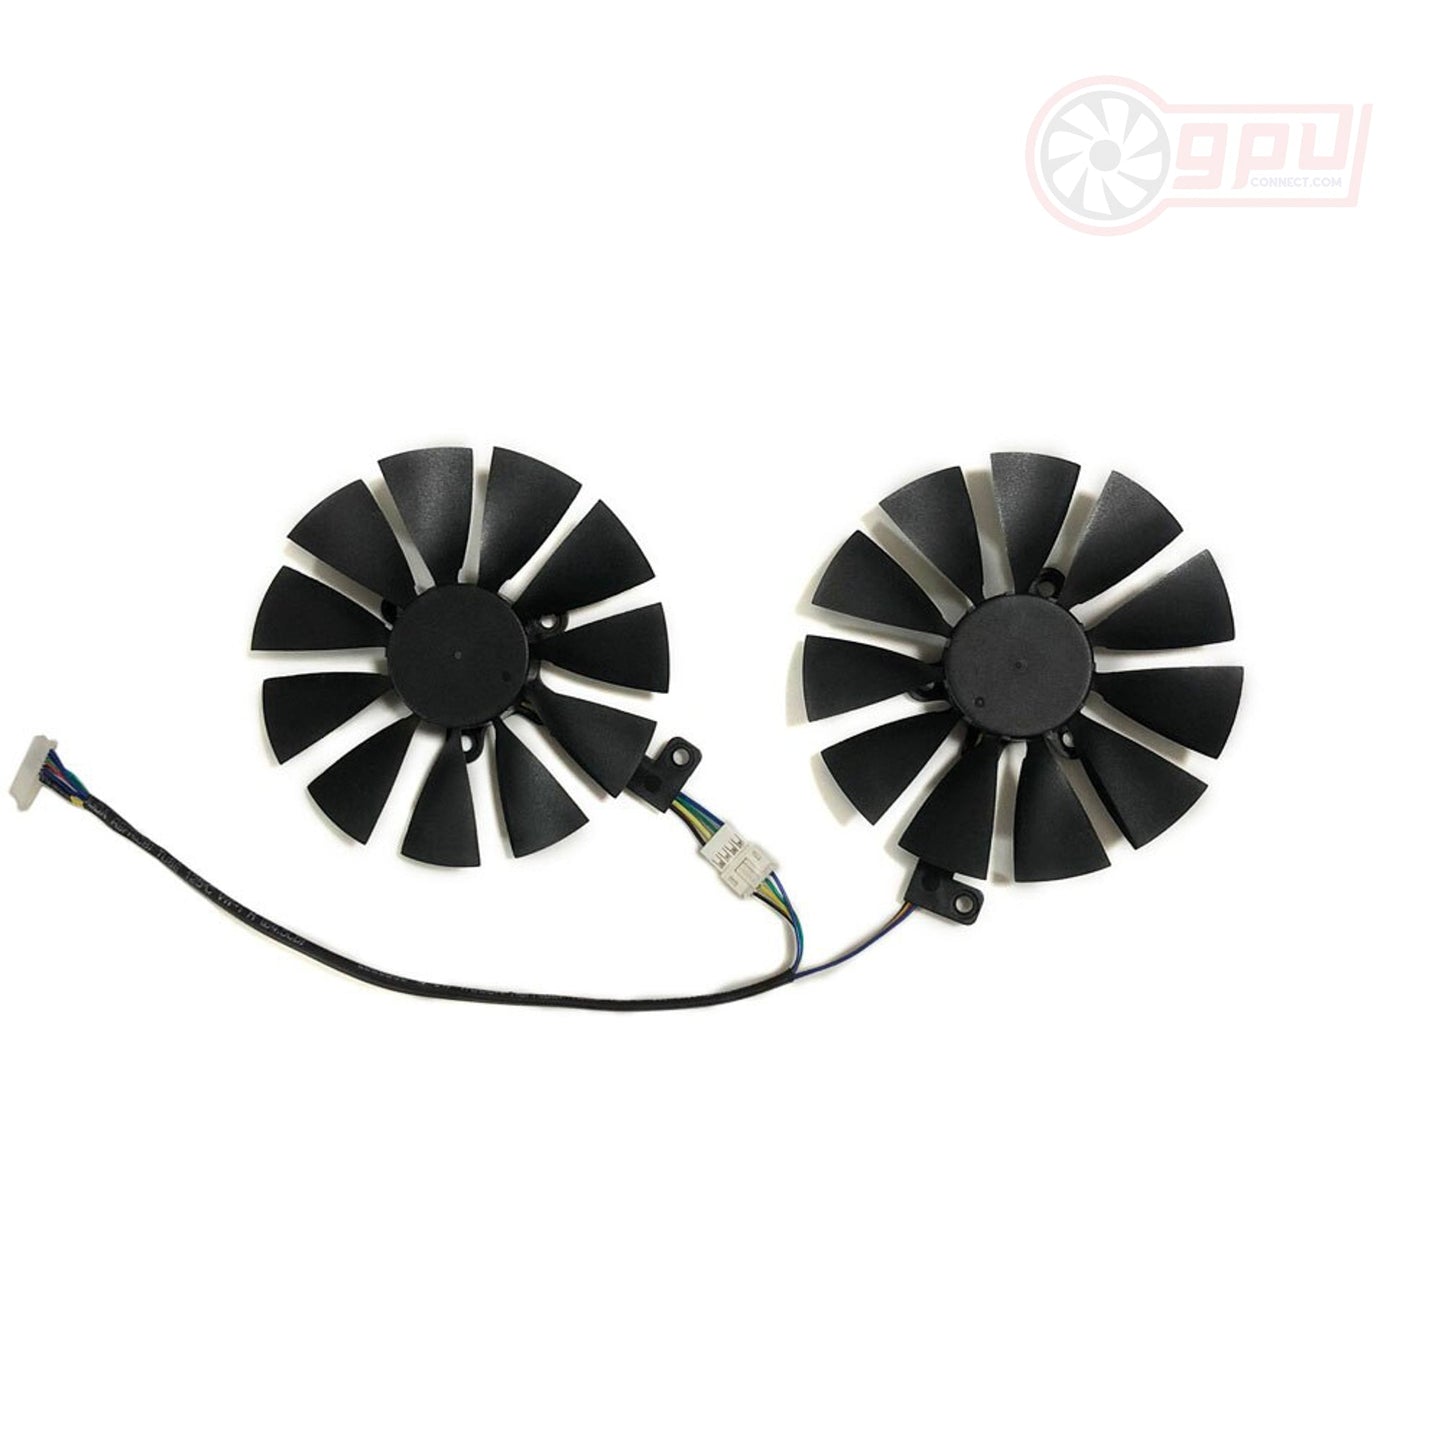 ASUS RTX 2080 TI Dual OC Fan Replacement - GPUCONNECT.COM